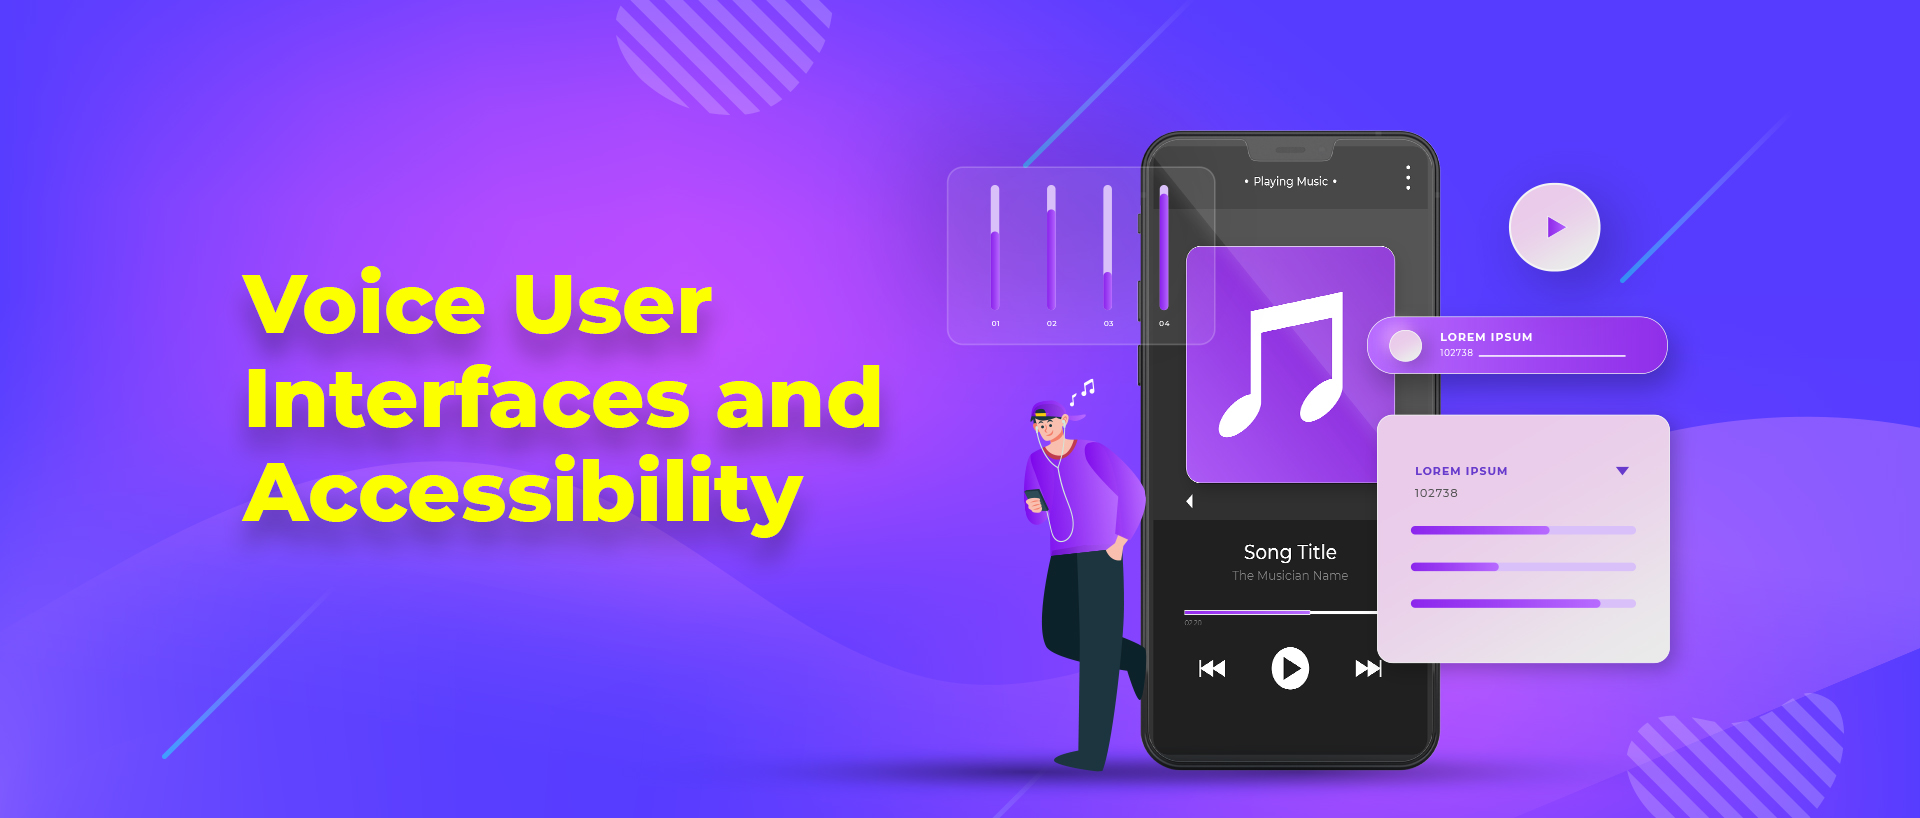 Voice User Interfaces (VUI) and Accessibility: Designing for Voice-Activated Systems